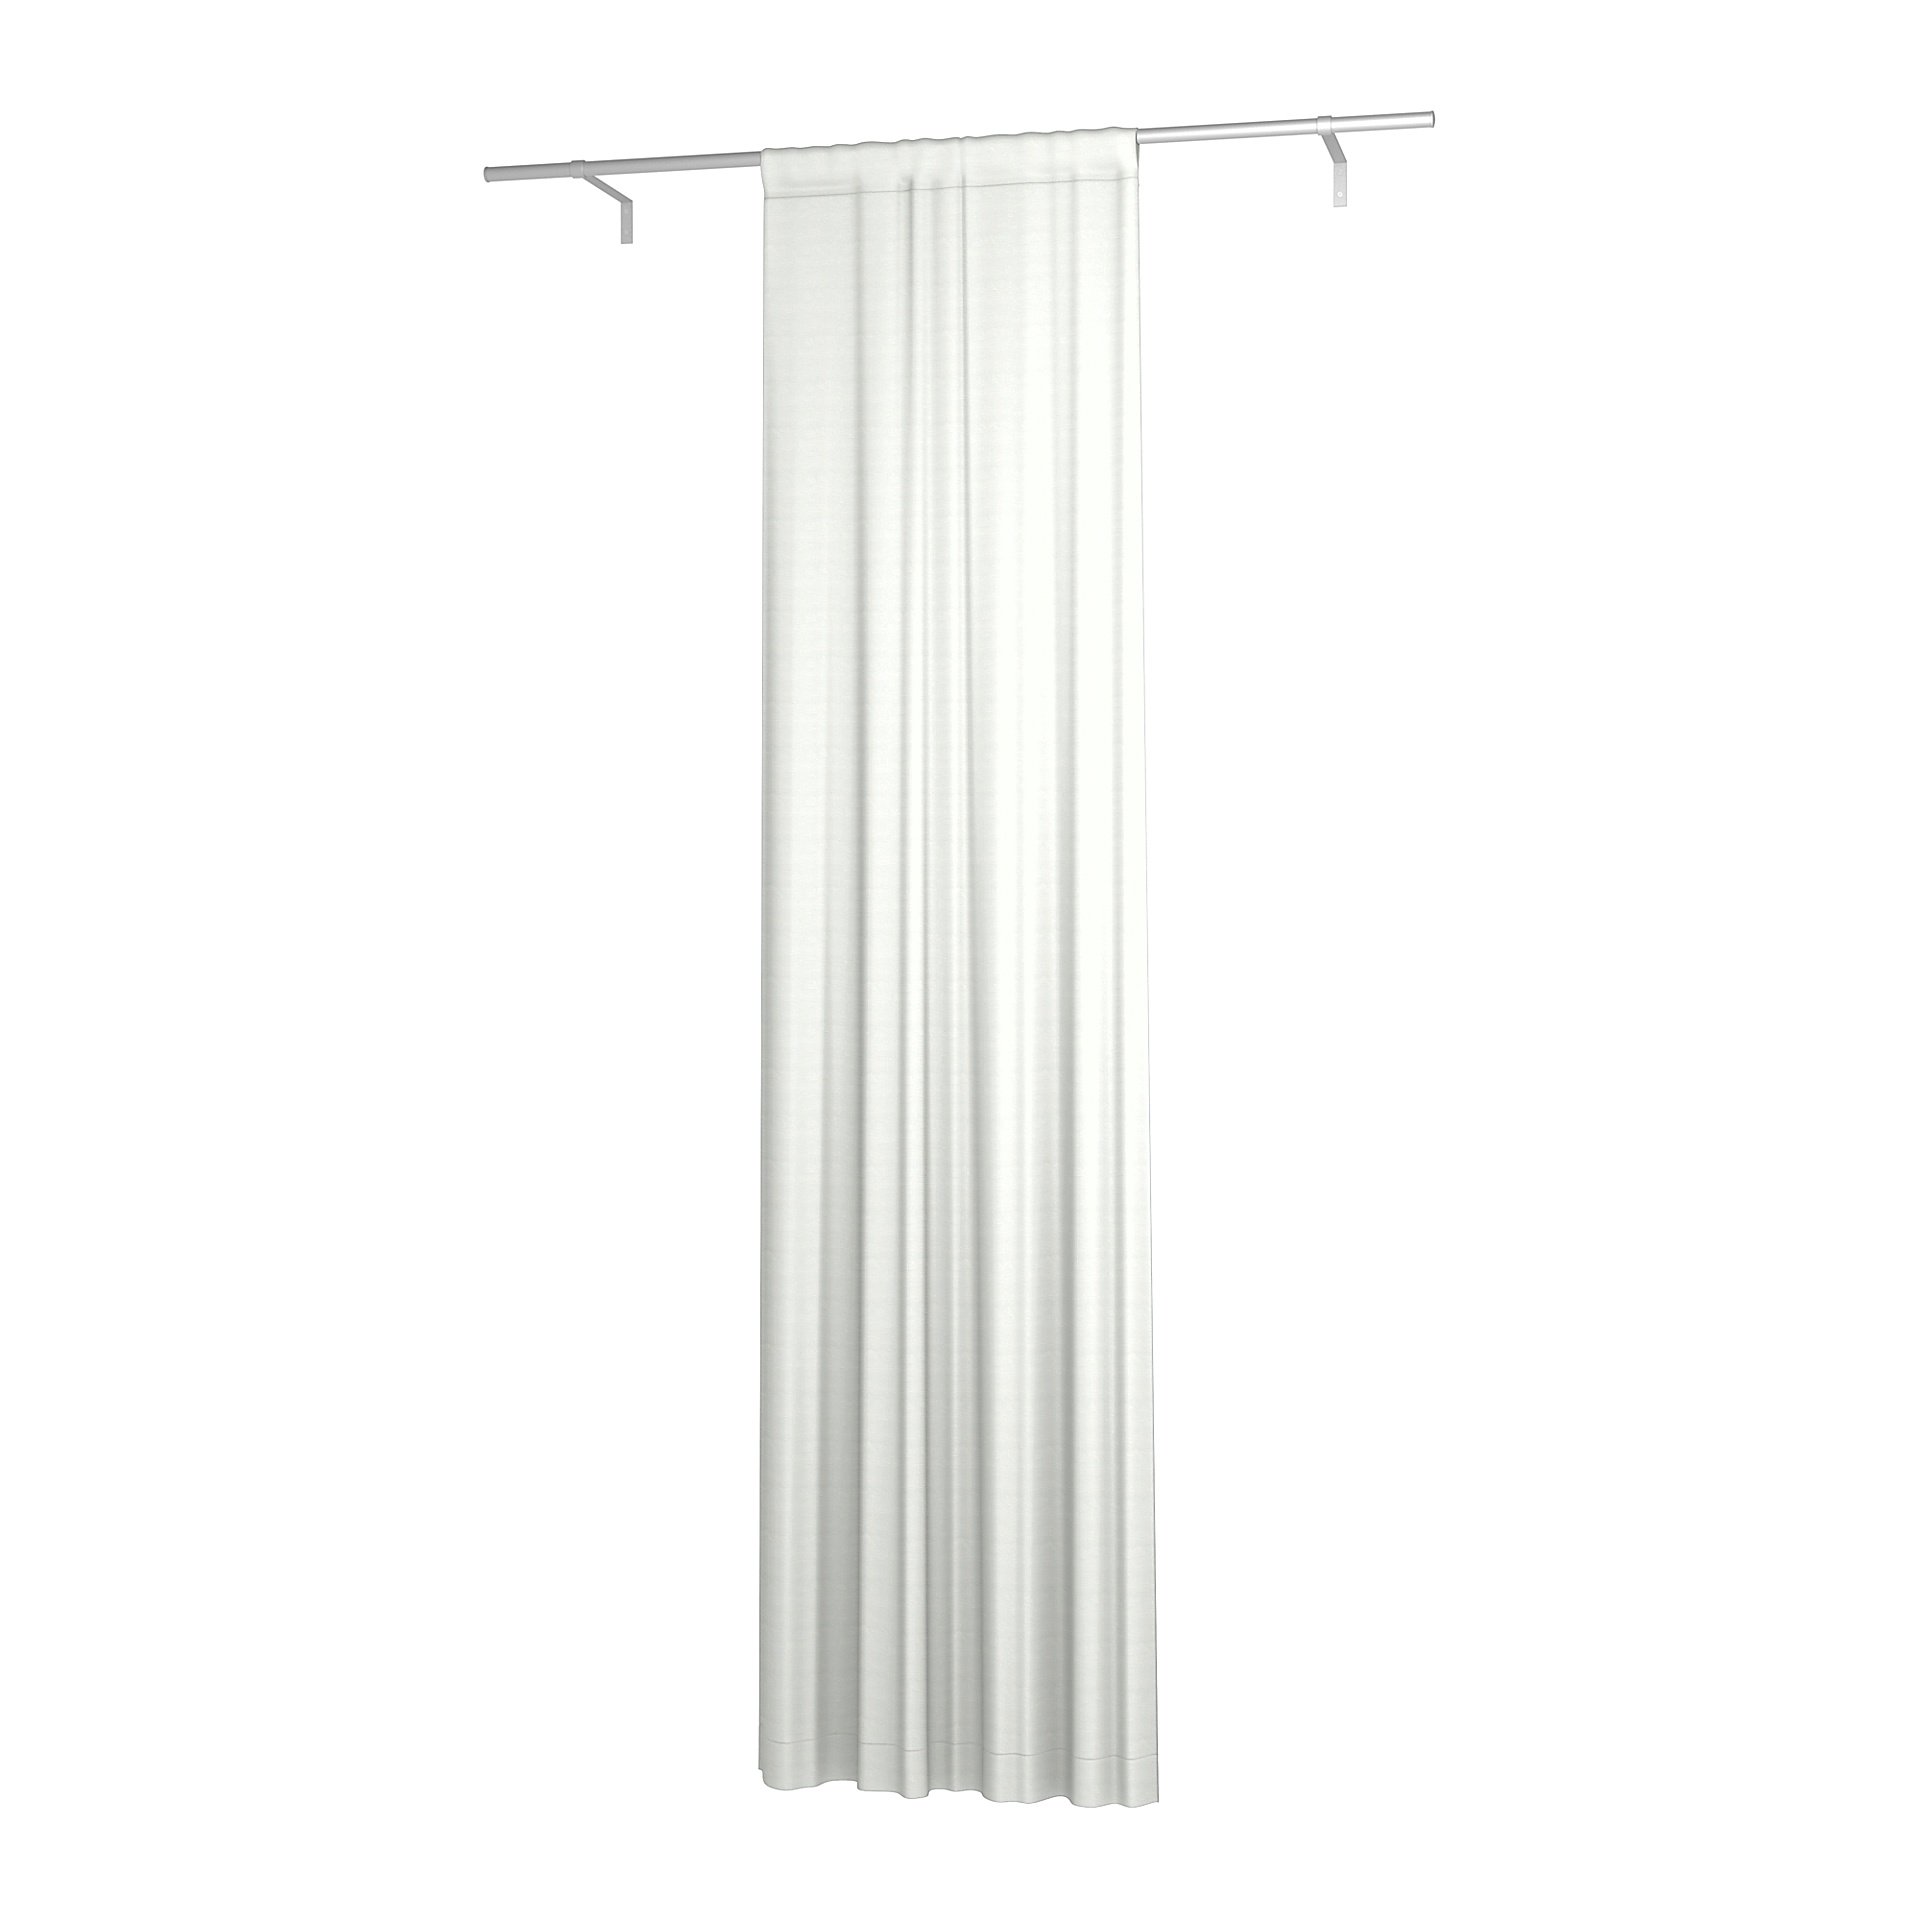 Single Width Curtain Panel with Tunnel/Creaseband, 300 cm, Optic White, Linen - Bemz